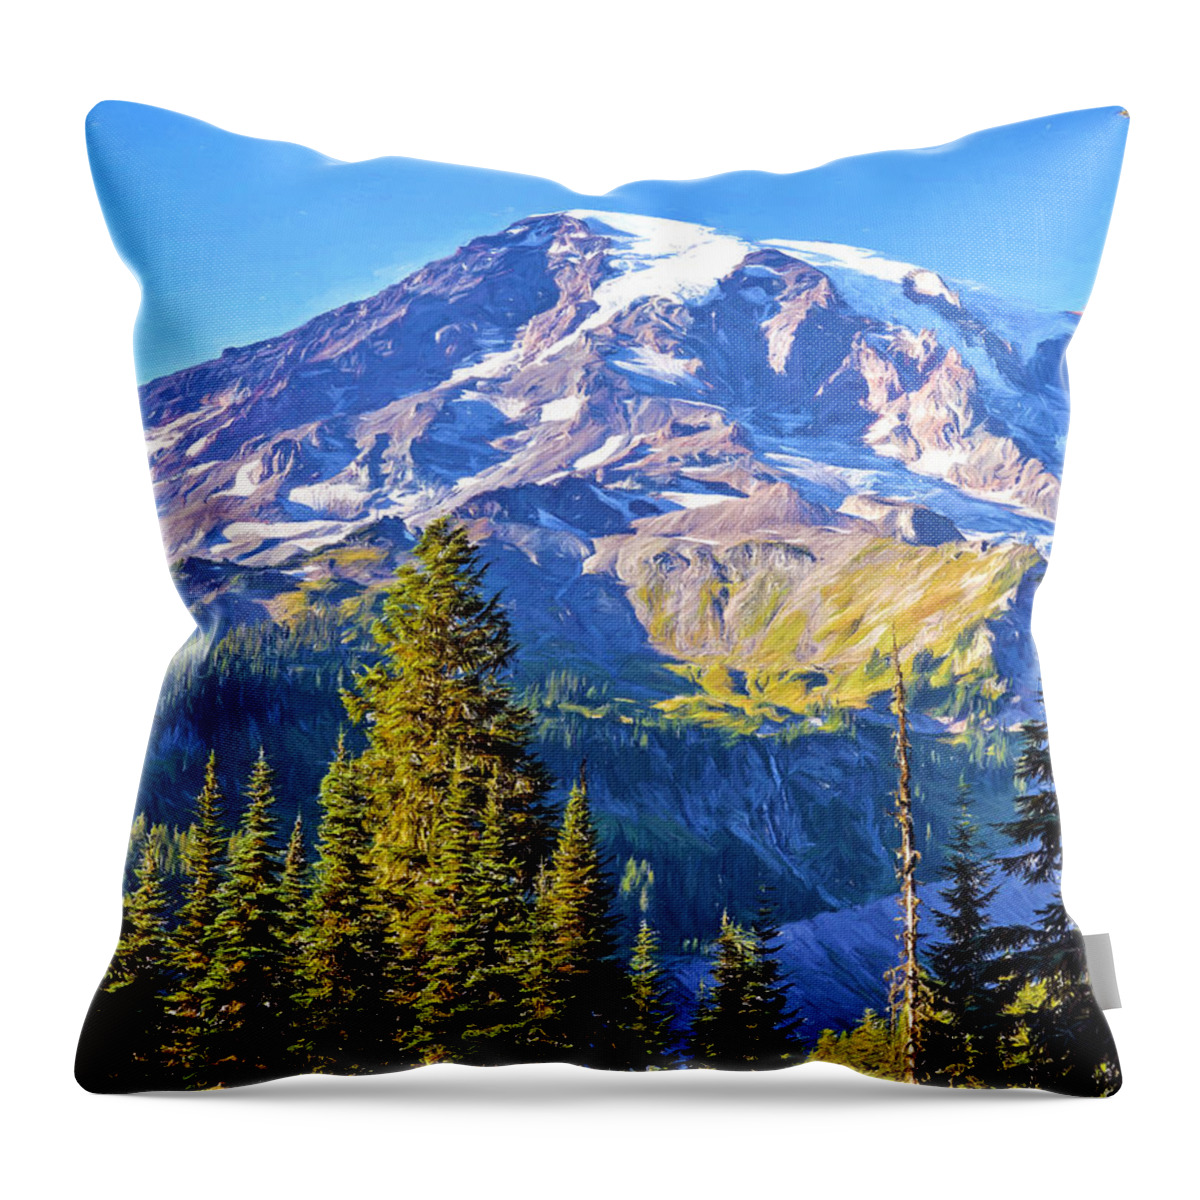 Mount Rainier Throw Pillow featuring the photograph Mountain Meets Sky by Anthony Baatz